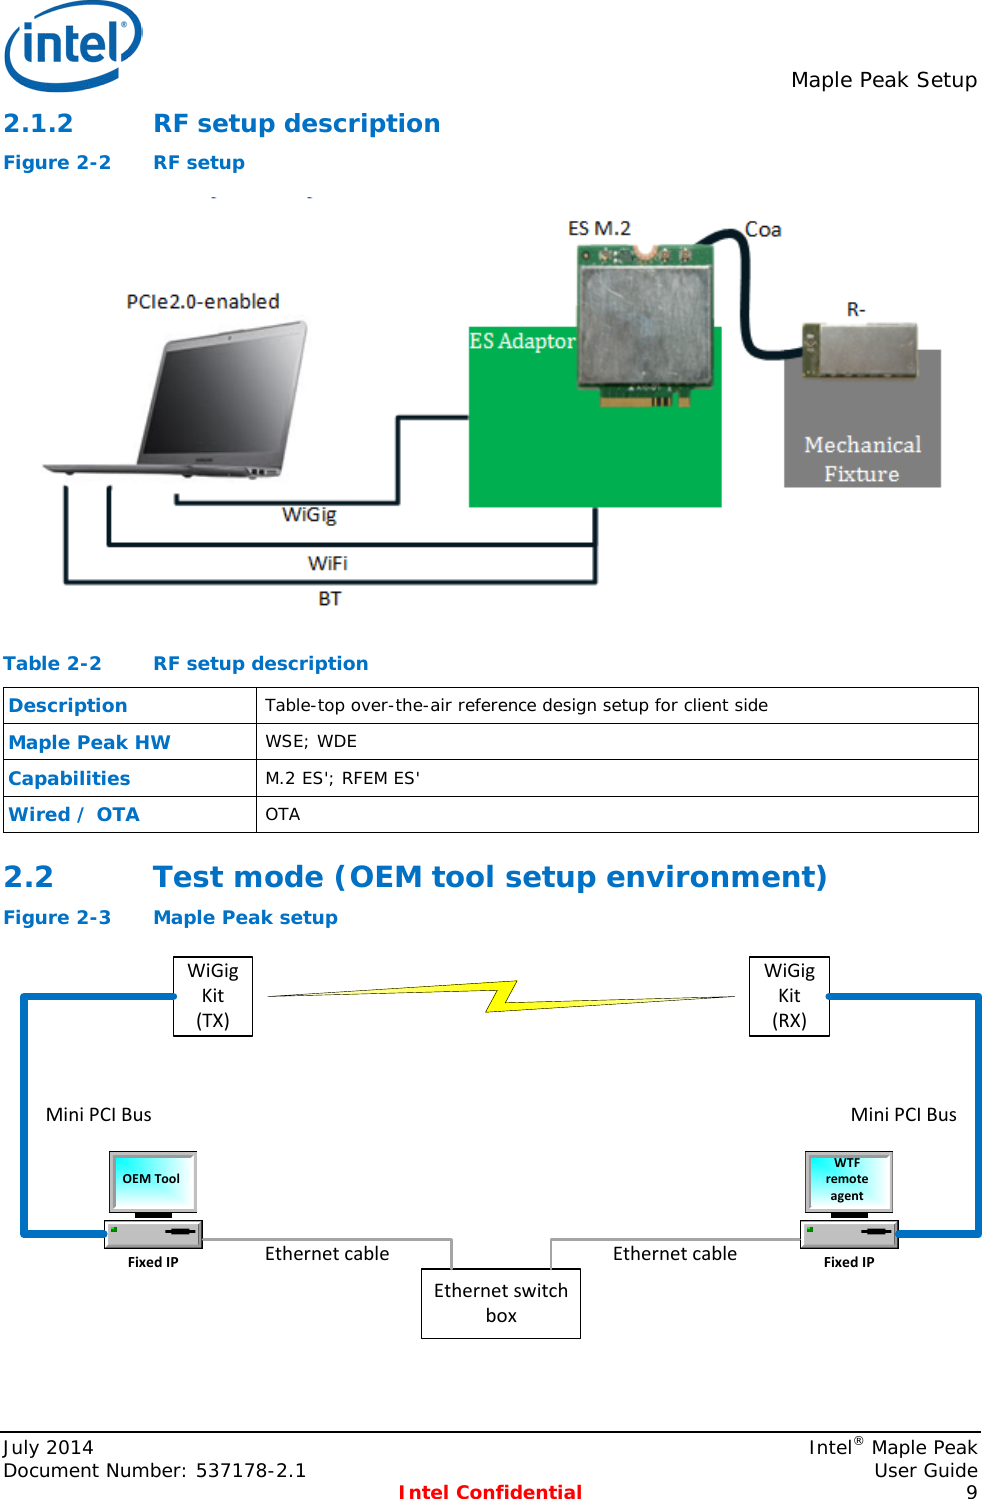  Maple Peak Setup  2.1.2 RF setup description Figure 2-2  RF setup  Table 2-2  RF setup description Description Table-top over-the-air reference design setup for client side Maple Peak HW WSE; WDE Capabilities M.2 ES&apos;; RFEM ES&apos; Wired / OTA OTA 2.2 Test mode (OEM tool setup environment) Figure 2-3  Maple Peak setup  Fixed IPFixed IPEthernet switch boxWTF remote agentOEM ToolEthernet cable Ethernet cableWiGig Kit(TX)Mini PCI BusWiGig Kit(RX)Mini PCI BusJuly 2014    Intel® Maple Peak Document Number: 537178-2.1    User Guide  Intel Confidential  9 